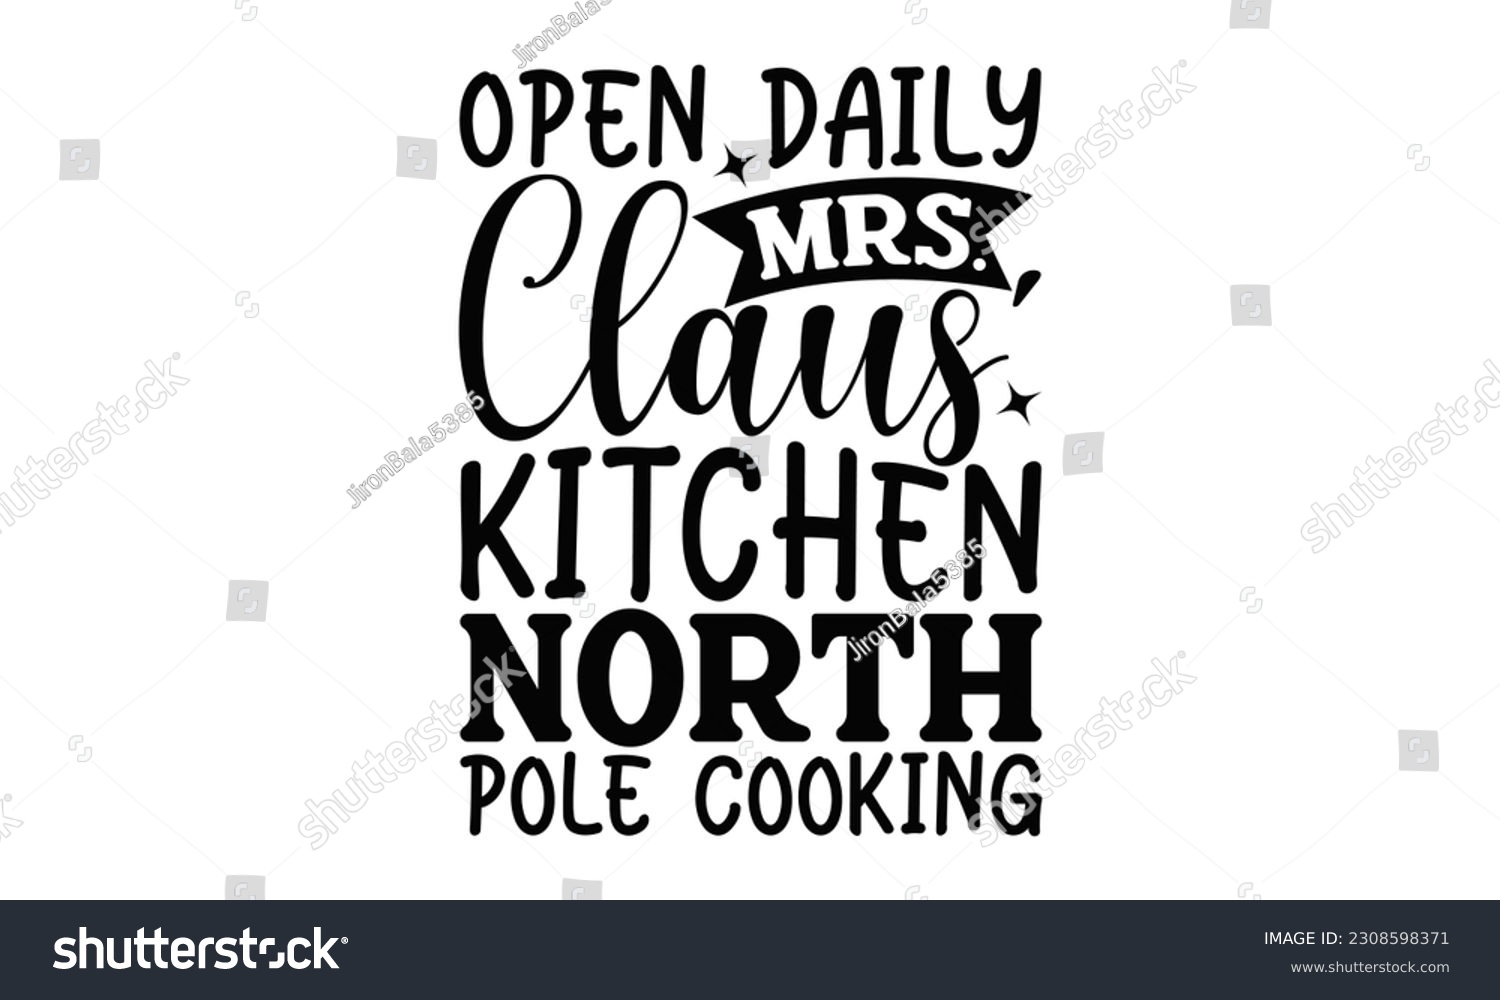 SVG of Open Daily Mrs. Claus' Kitchen North Pole Cooking - Cooking SVG Design, Hand drawn vintage illustration with hand-lettering and decoration elements with, SVG Files for Cutting. svg